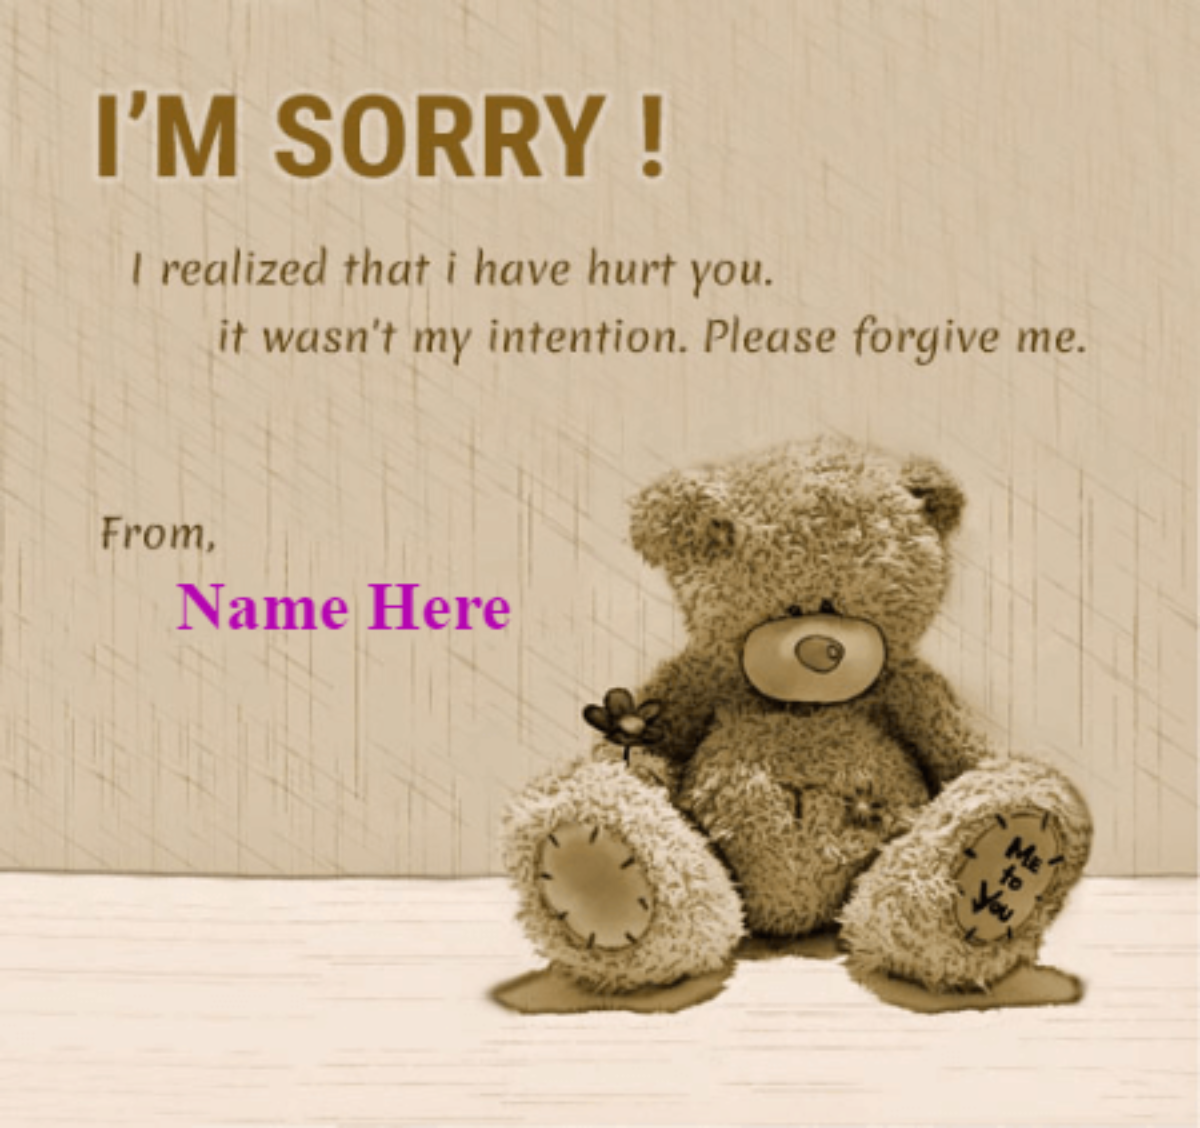 Really sorry for your. Sorry please. Открытка forgive me. Sorry открытка. Открытка am sorry.